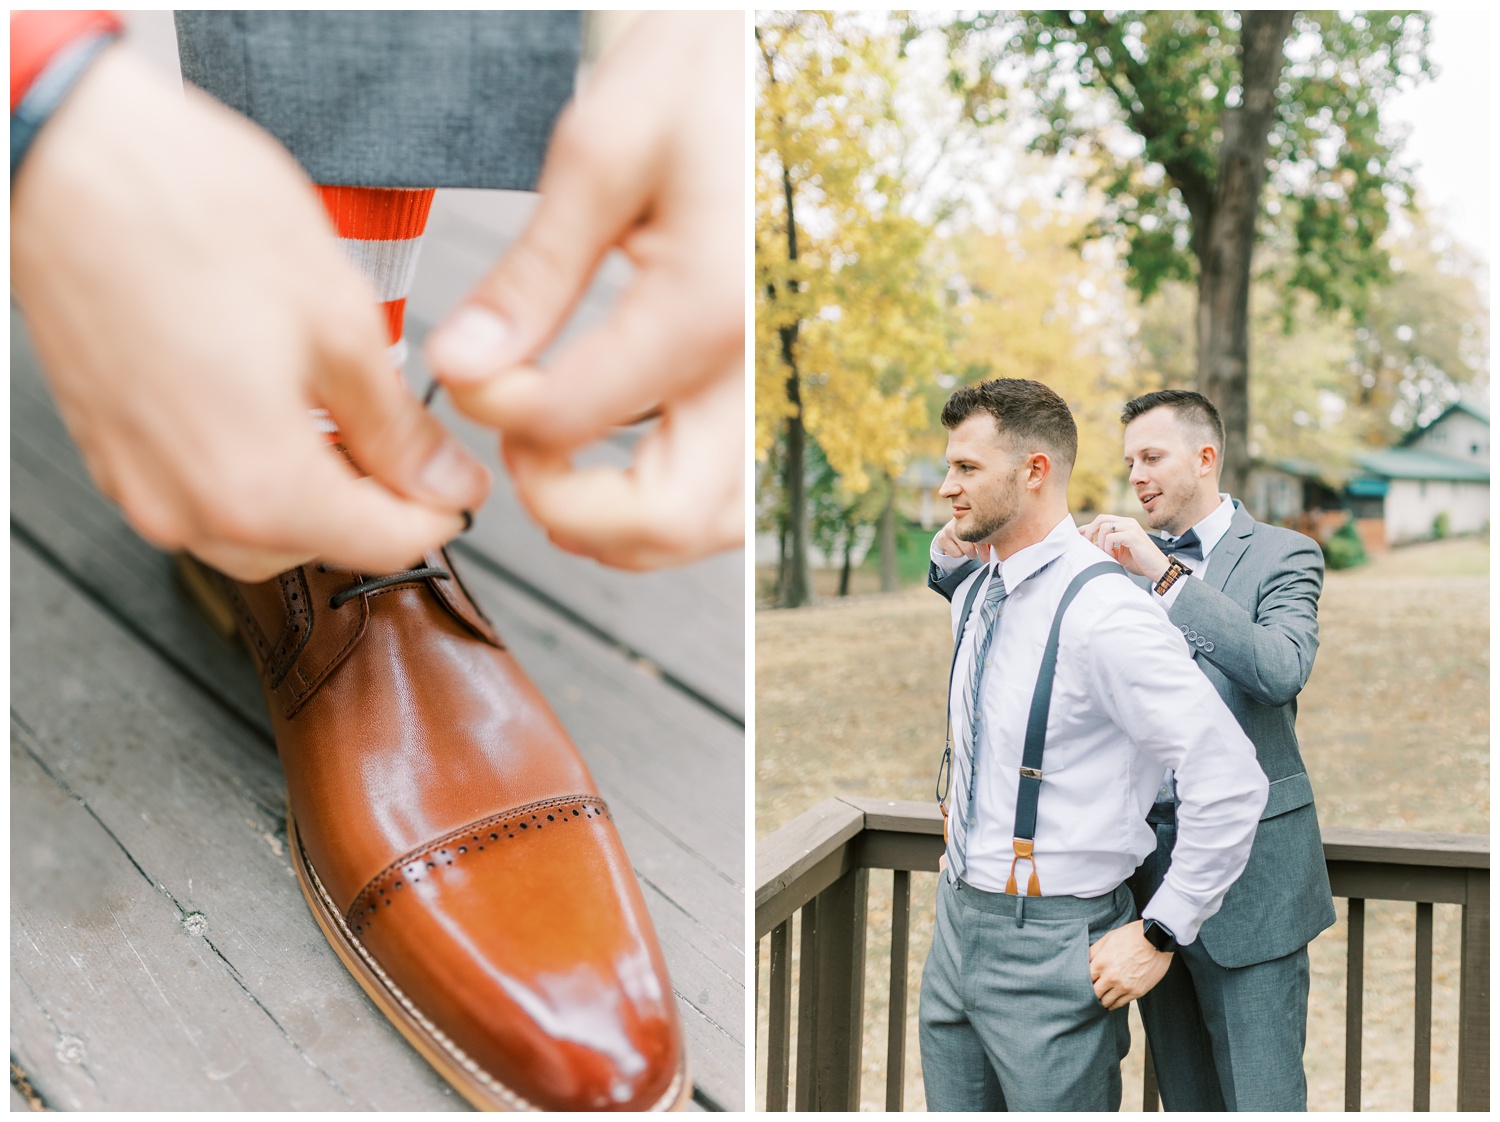 Groom tying shoes and getting ready for wedding ceremony